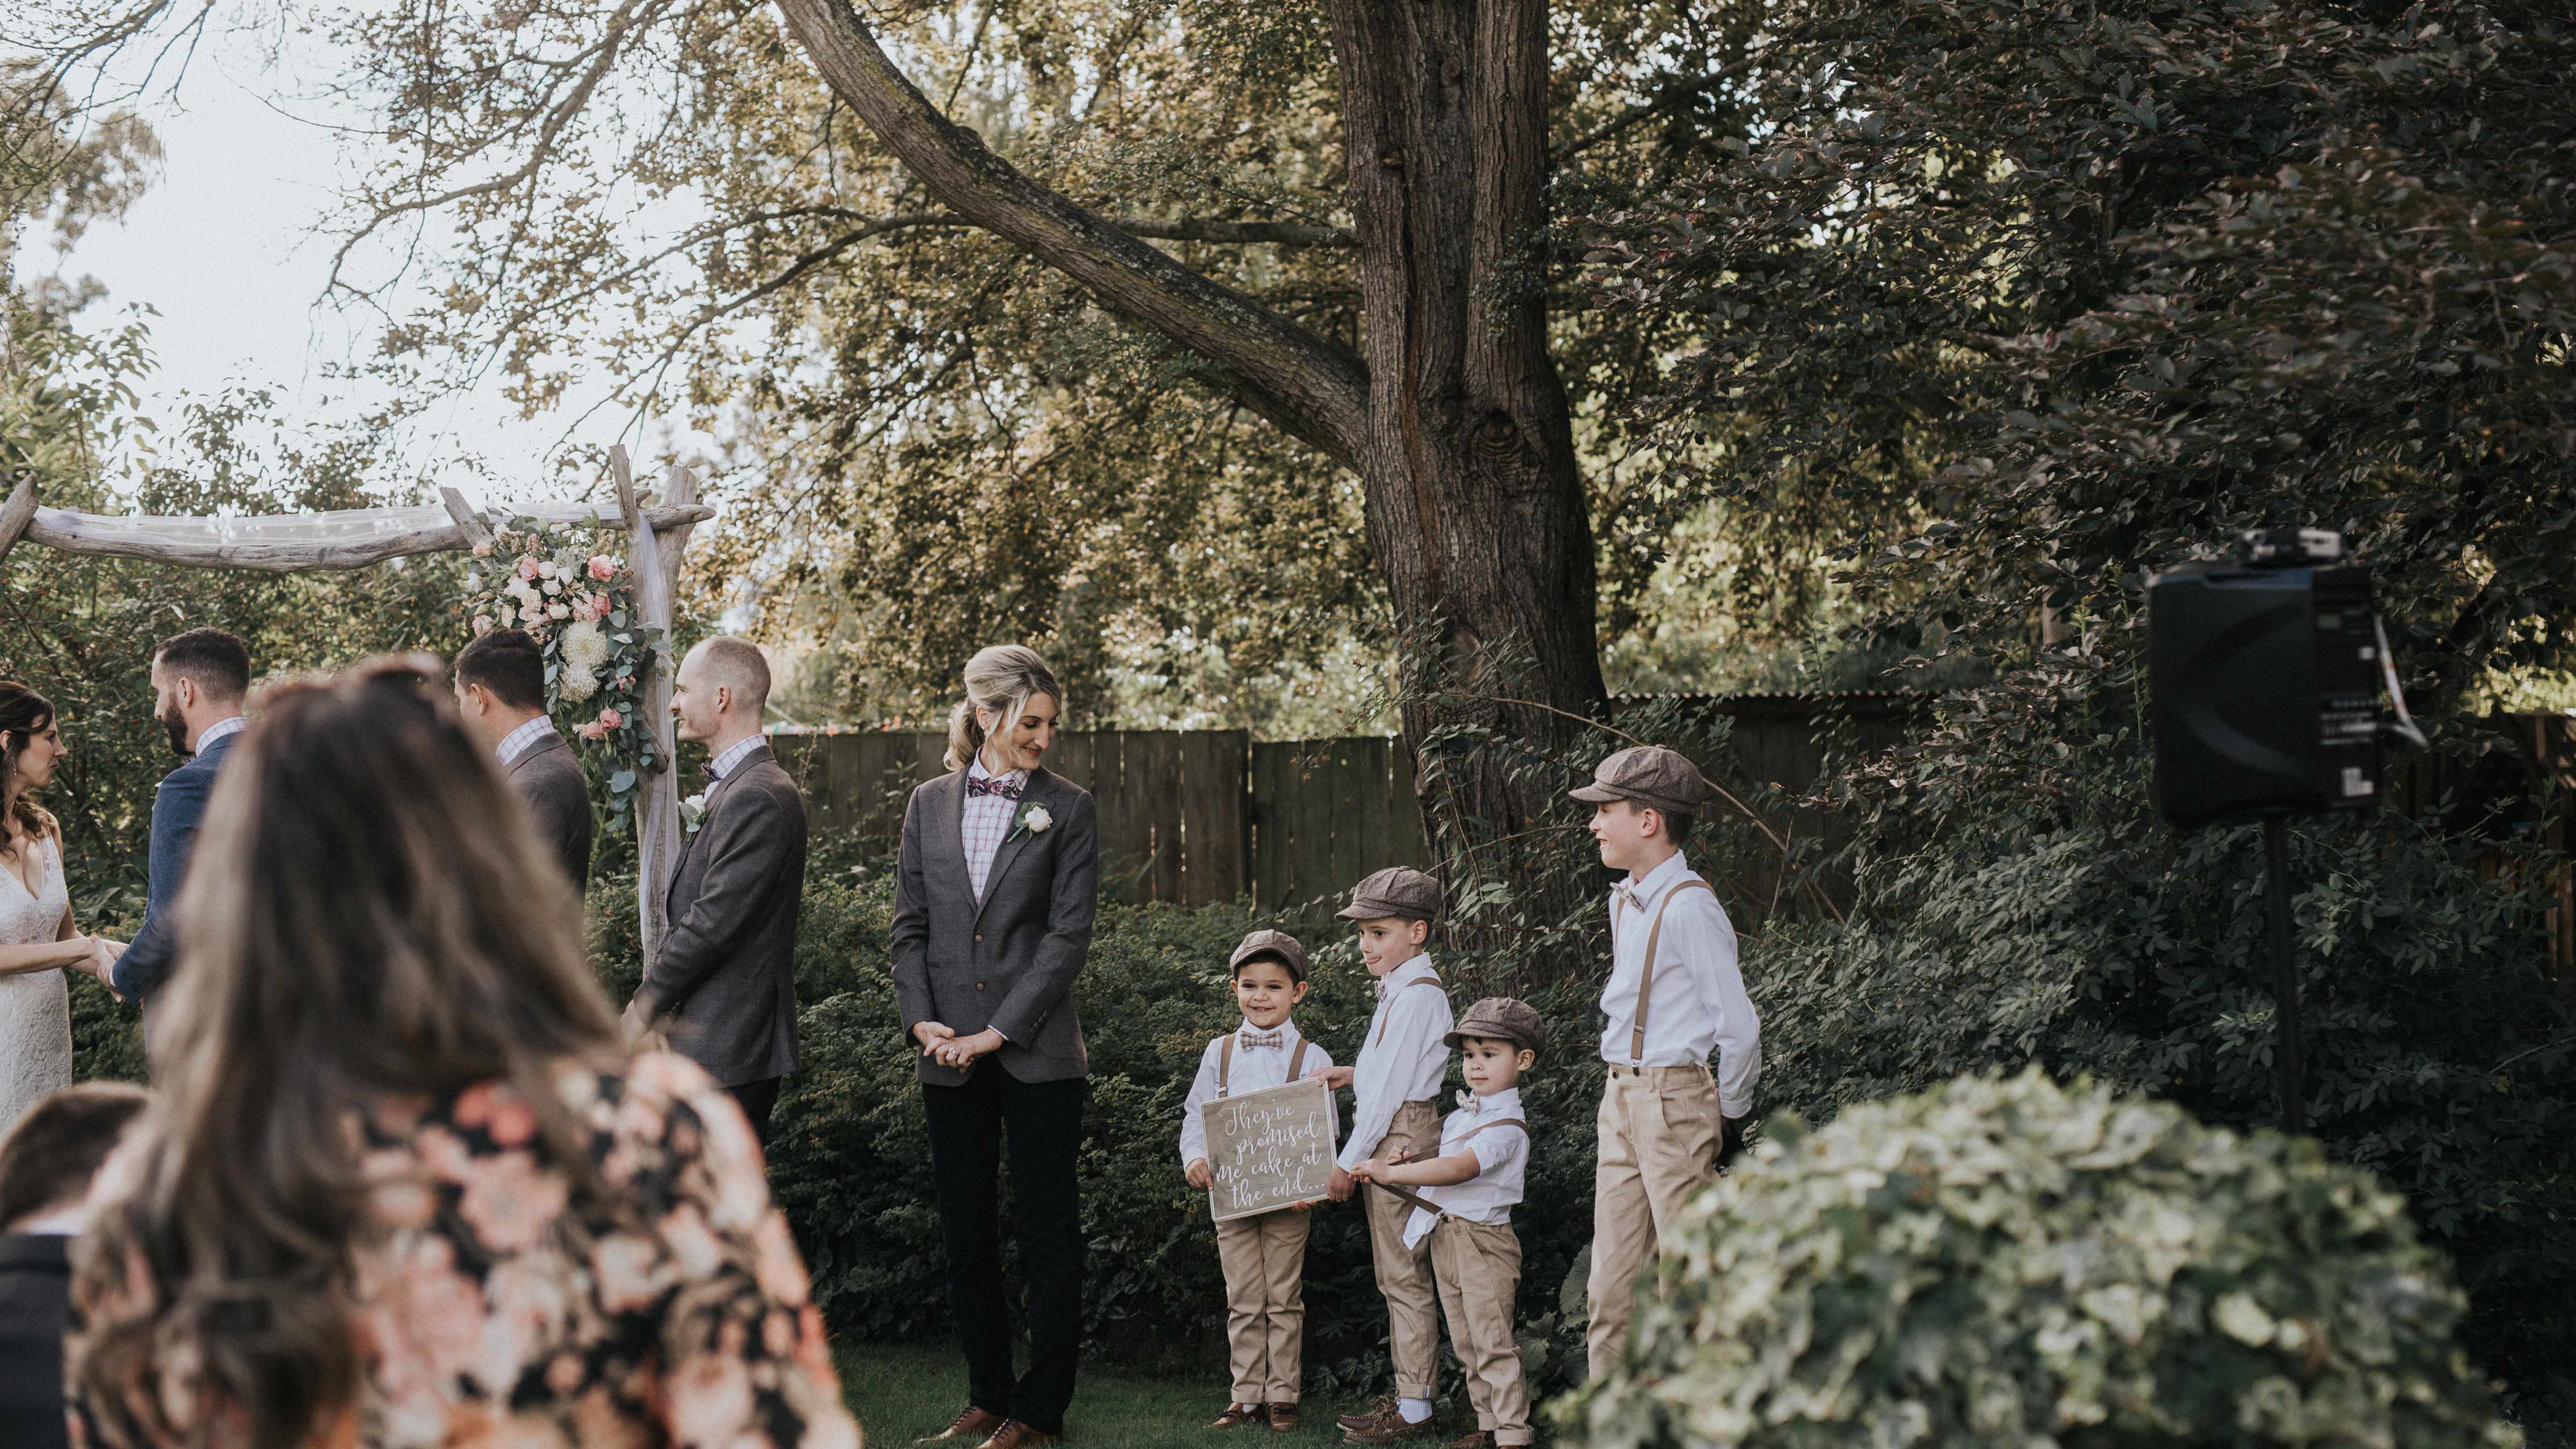 Members of a bridal party stand in front of a wooden arch adorned with flowers. Four page boys are looking cheekily at guests in front of them. Photo: Cassie Sullivan.